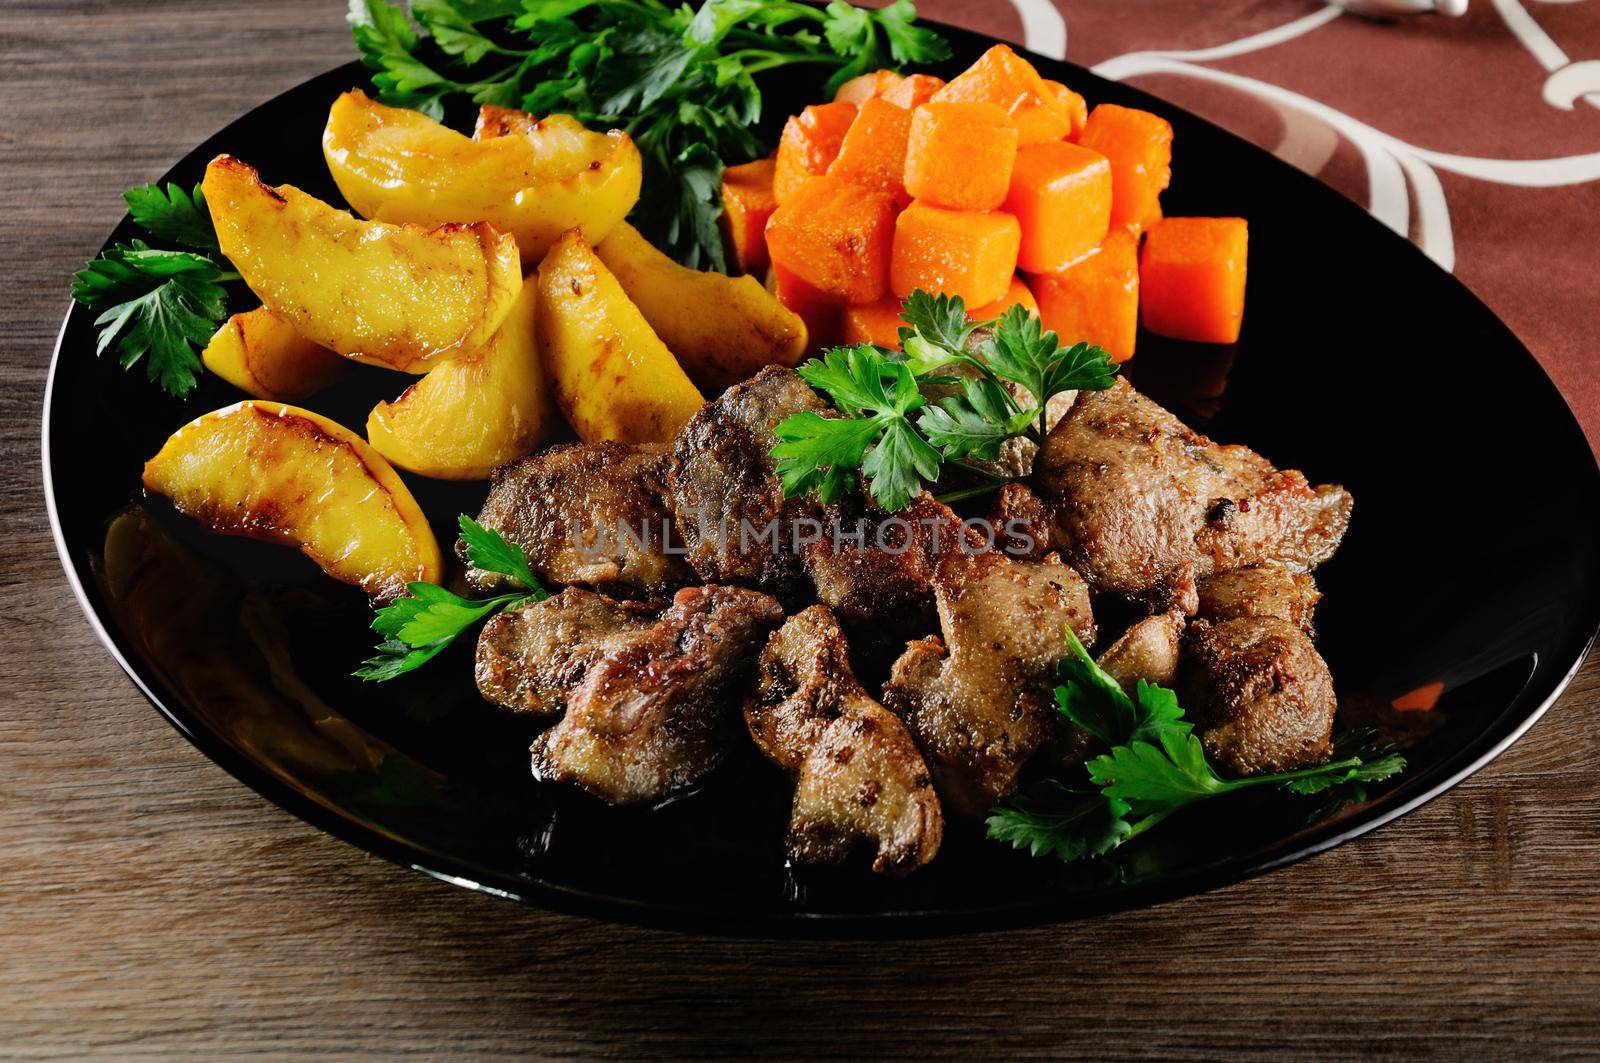 Chicken liver with vegetables by Apolonia